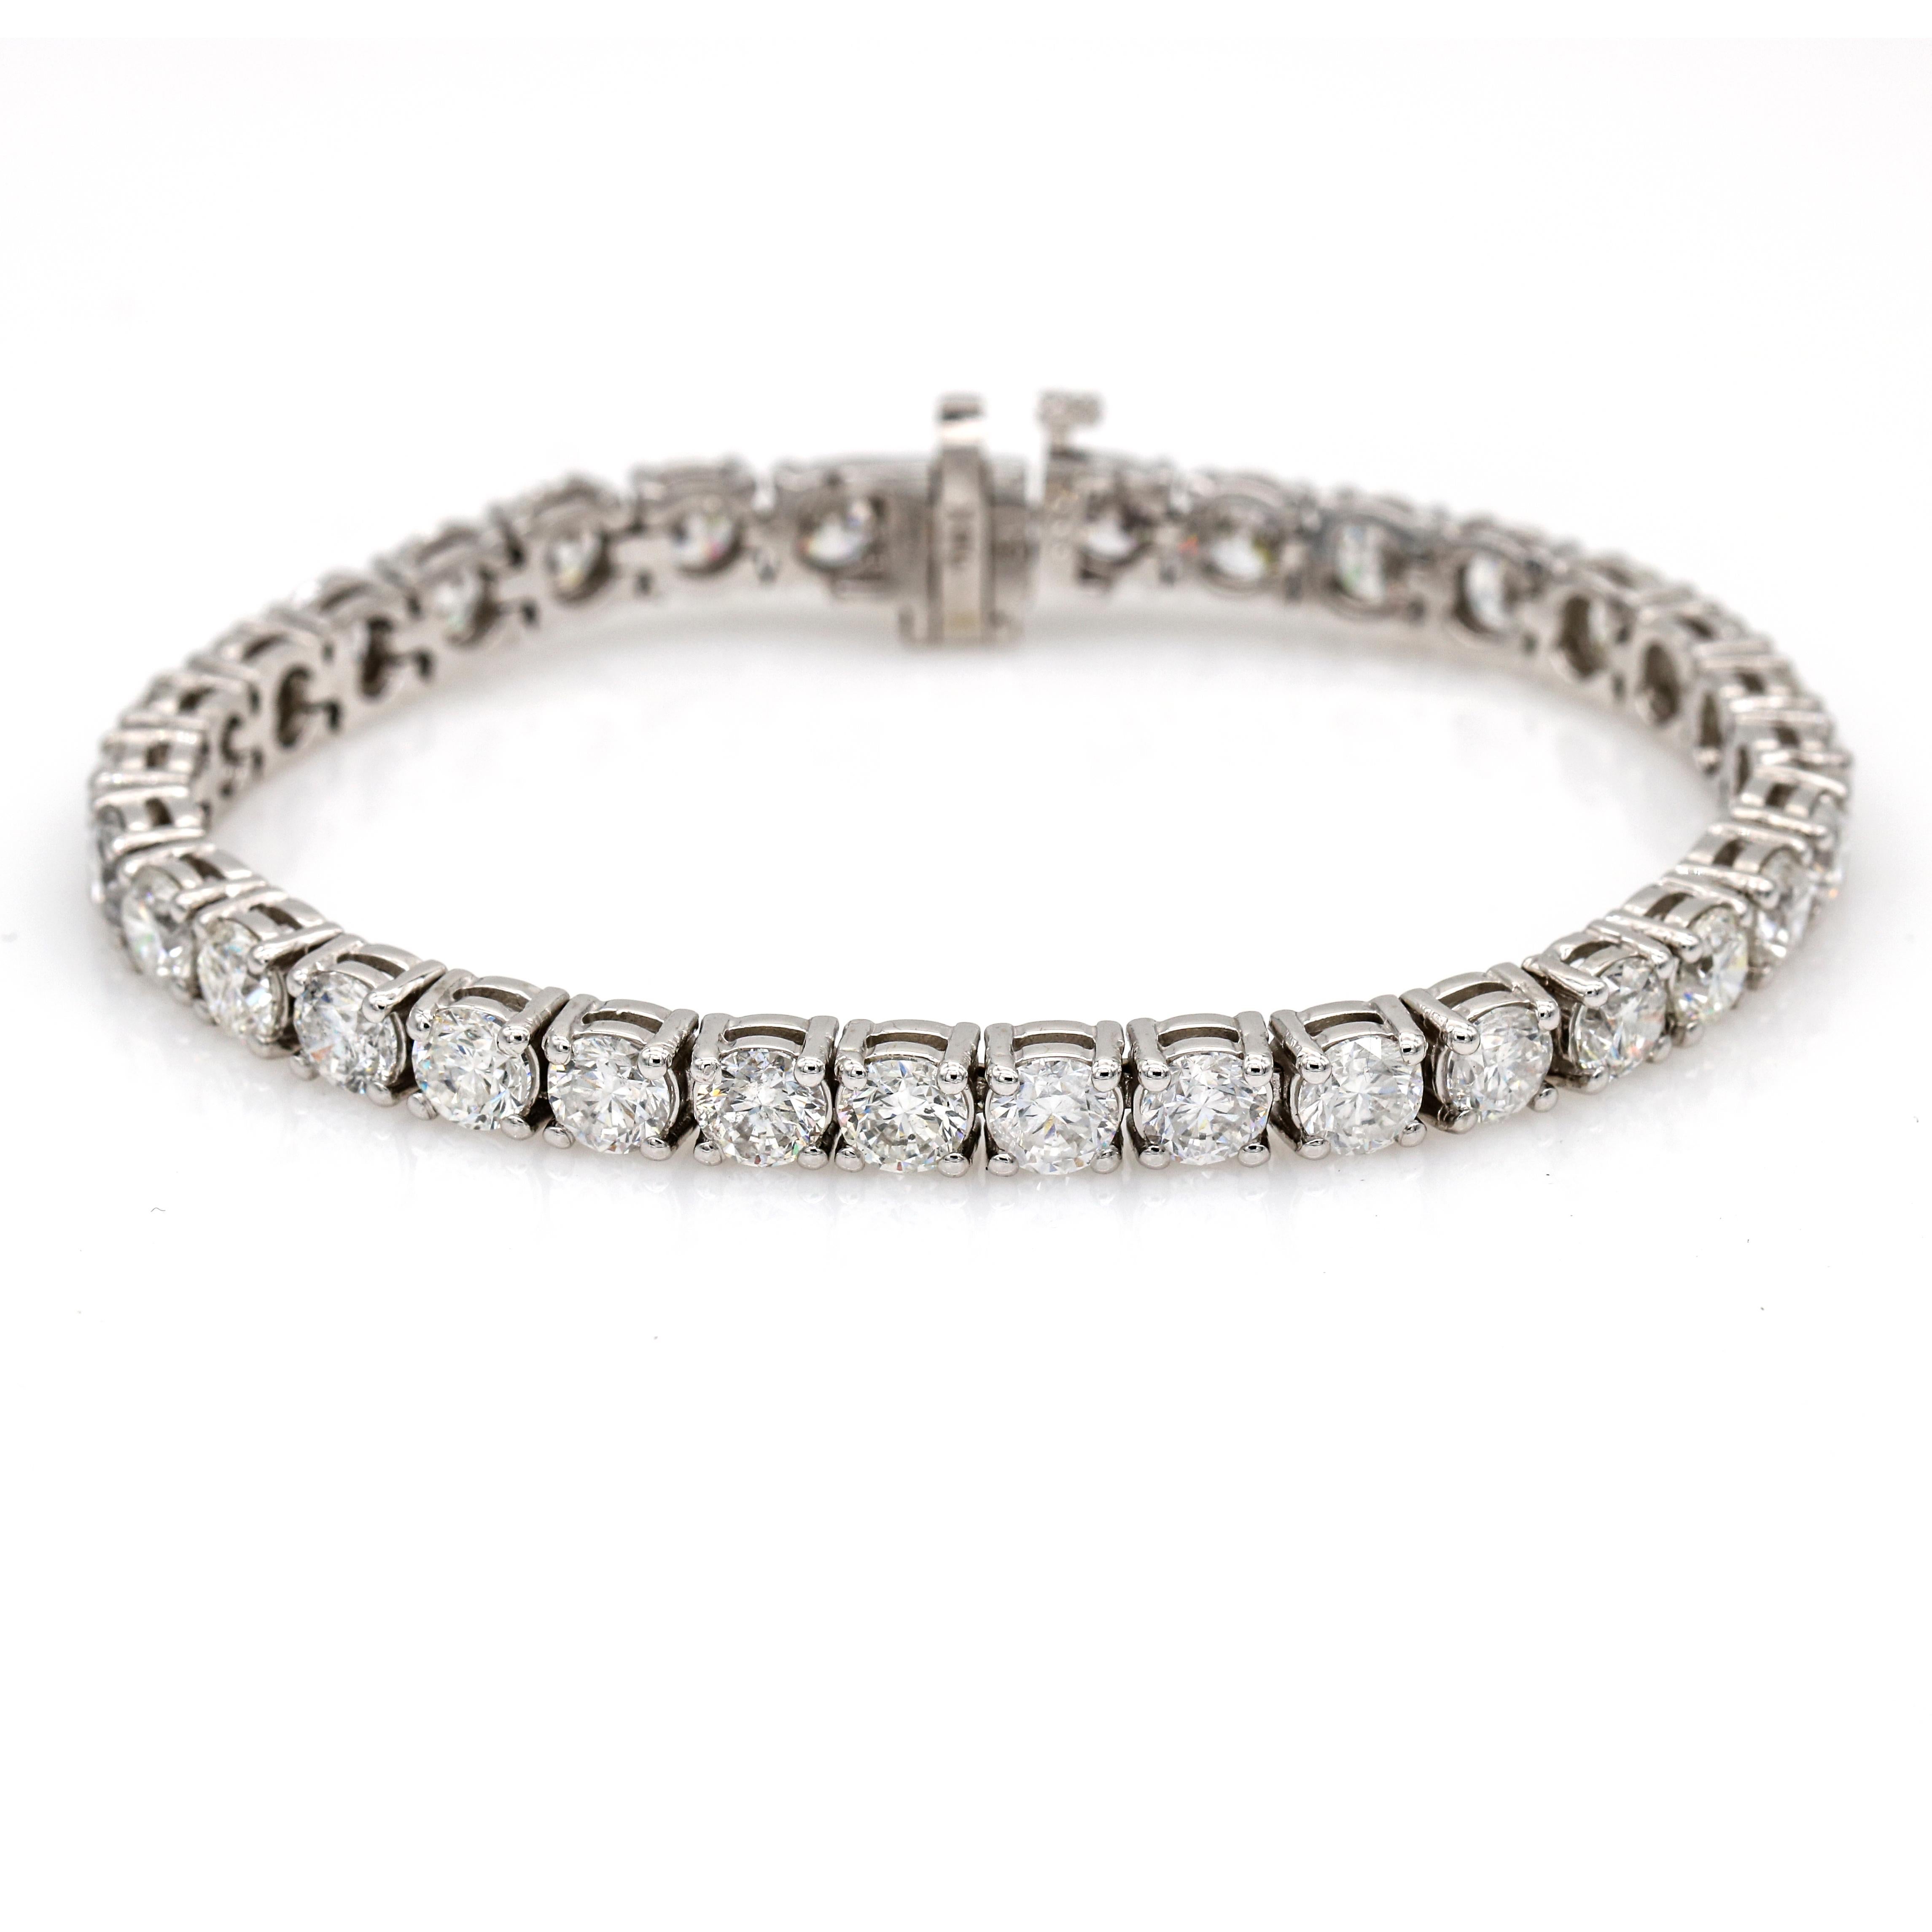 Stunning and dazzling, in 14-karat white gold, this Women's Classic Diamond Tennis Bracelet features 33 round brilliant cut diamonds that weigh 16.55 carats. The diamonds are secure in a classic slide clasp with safety. It is perfect for any